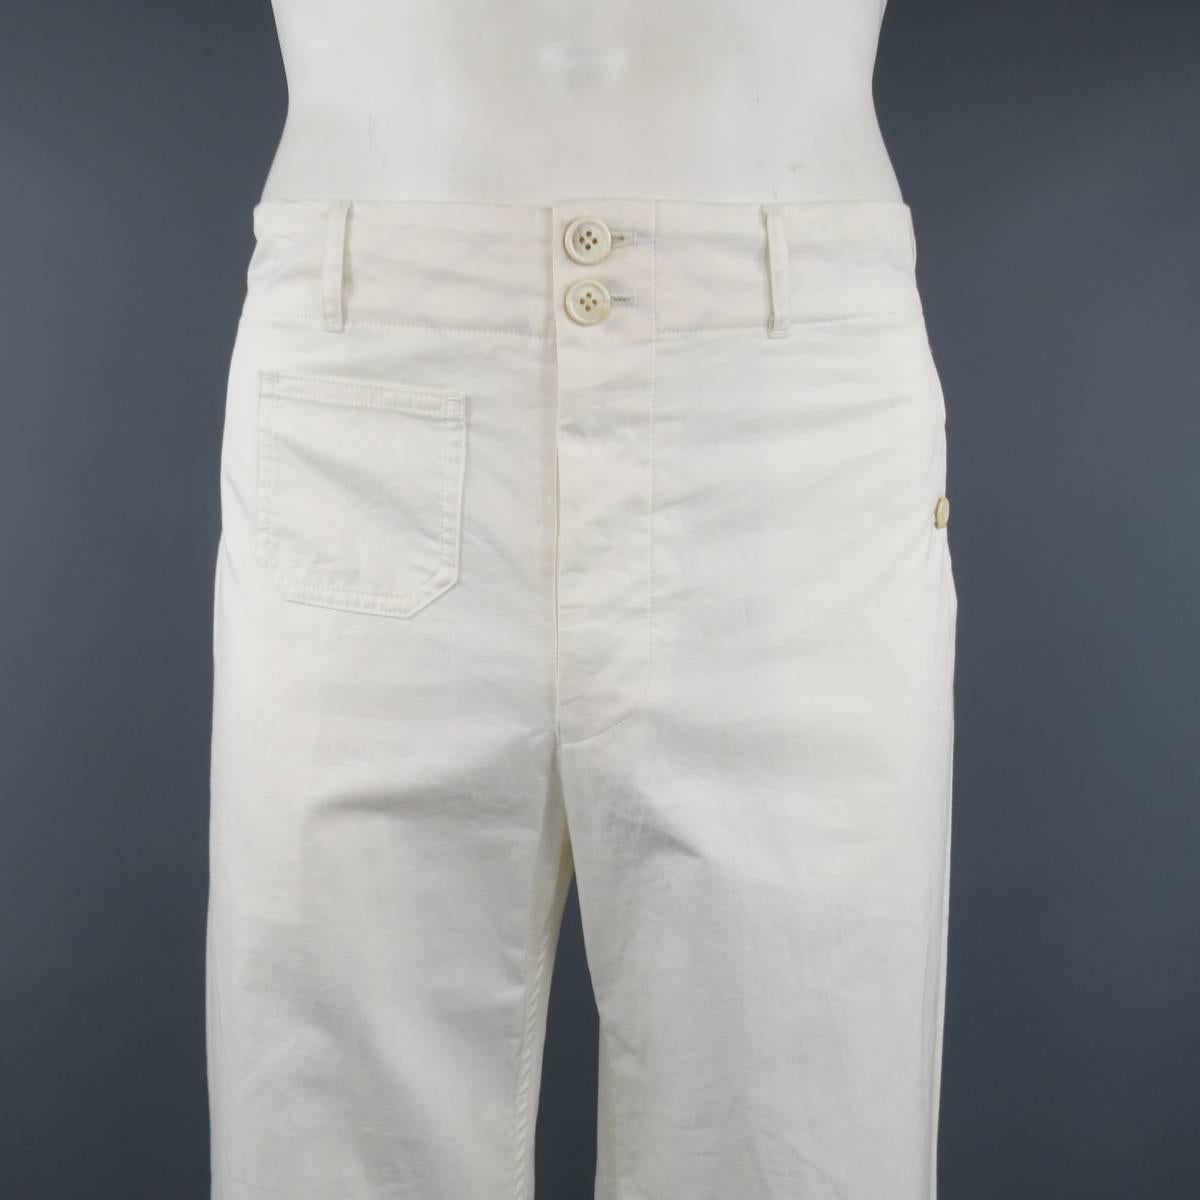 JUNYA WATANABE MAN cargo pants come in a light weight cream twill and feature a wide, straight leg, buttoned slit pockets, patch pocket, and adjustable side tabs. Minor Wear.
 
Good Pre-Owned Condition.
Marked: L
 
Measurements:
 
Waist: 37